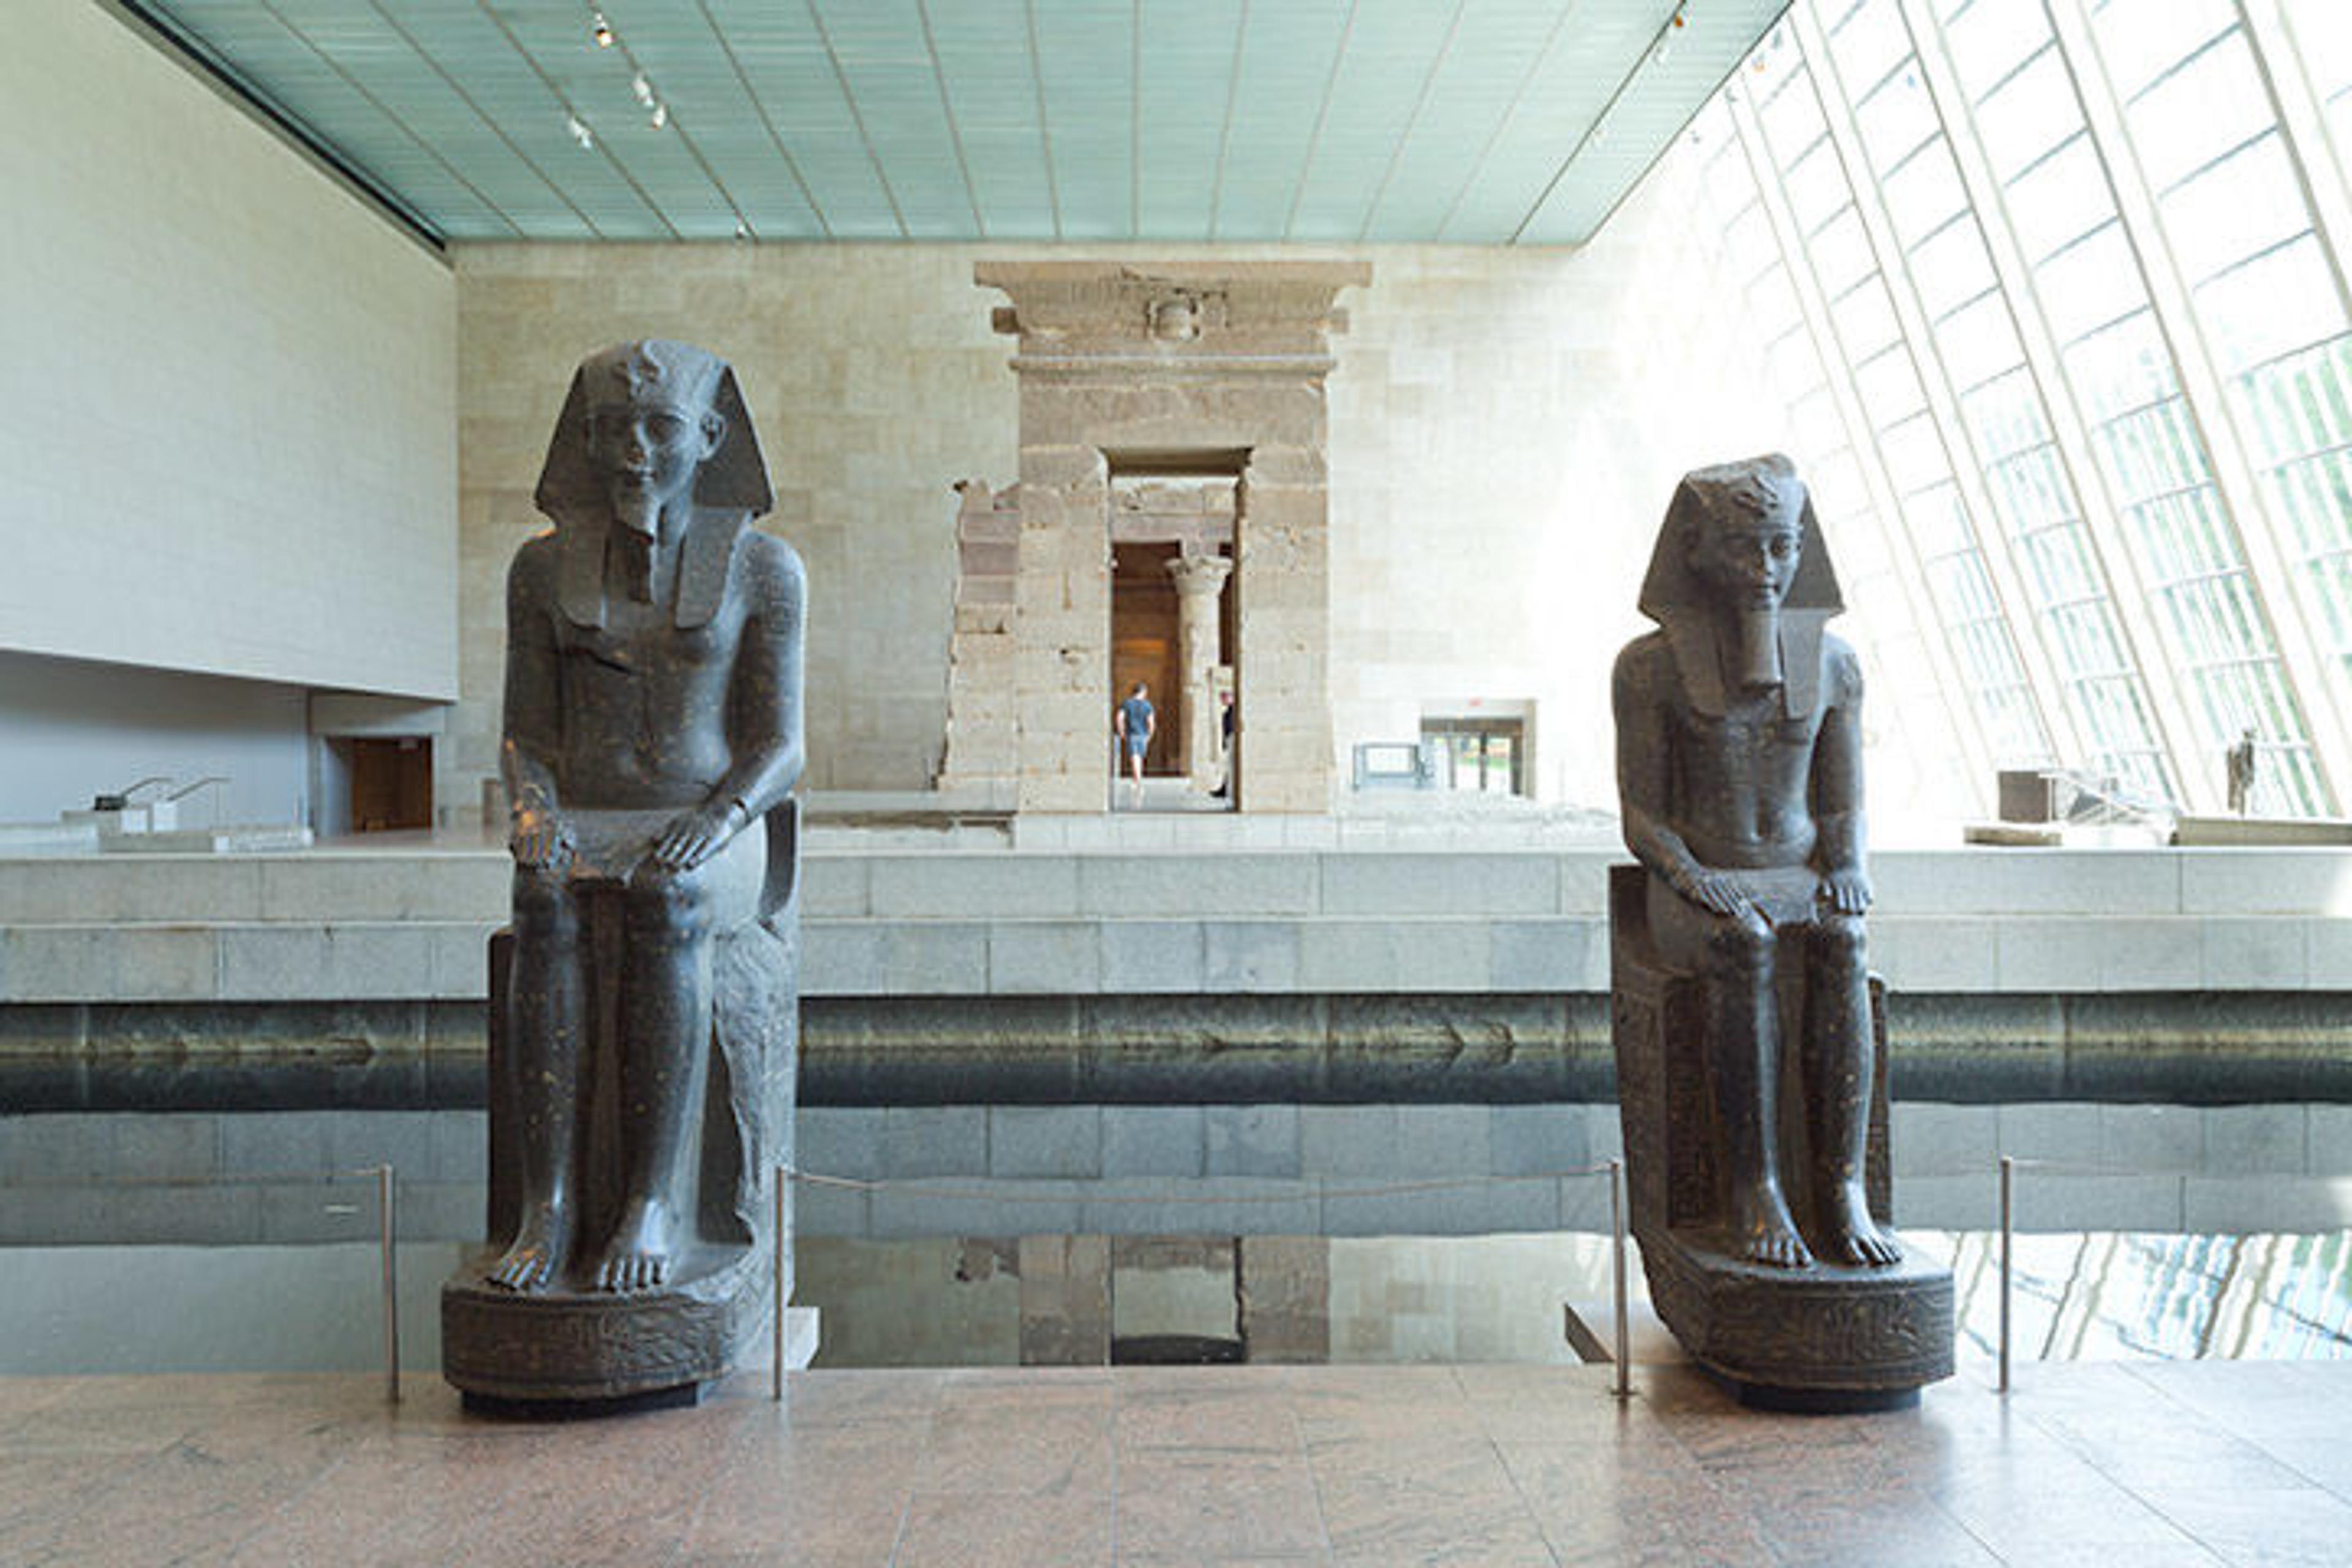 The reflecting pool at the Temple of Dendur